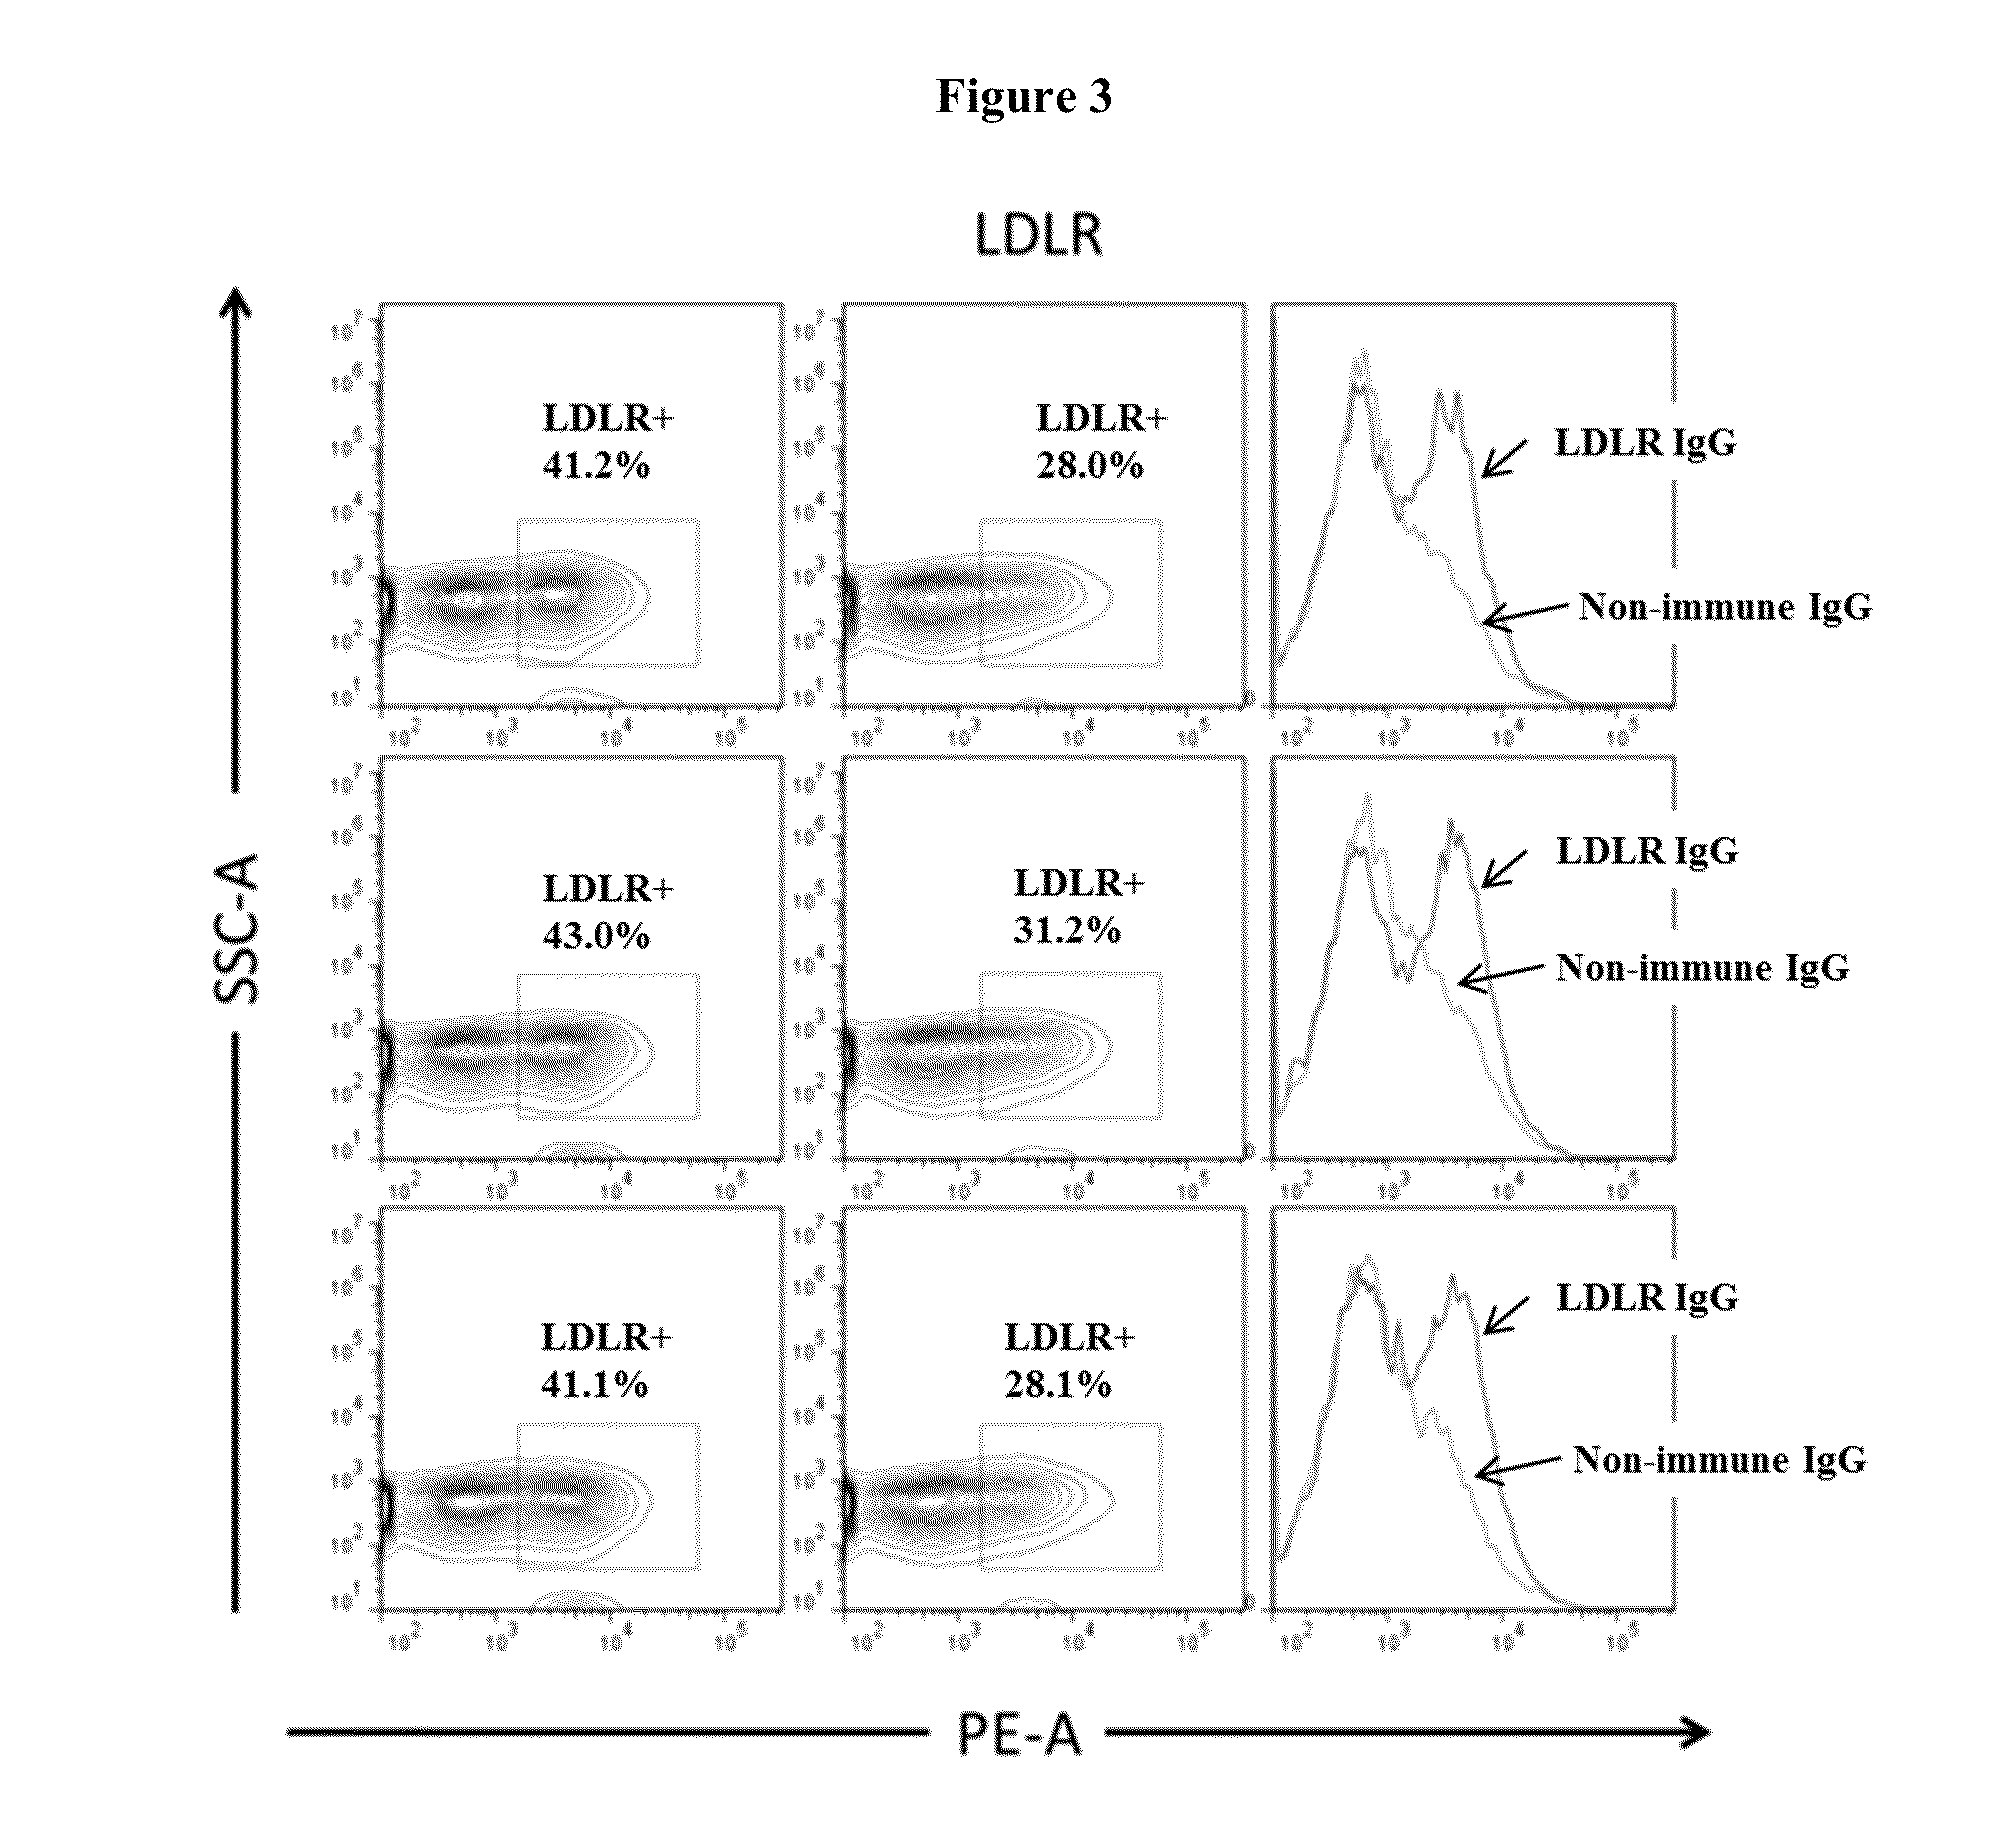 Compositions and methods of altering cholesterol levels